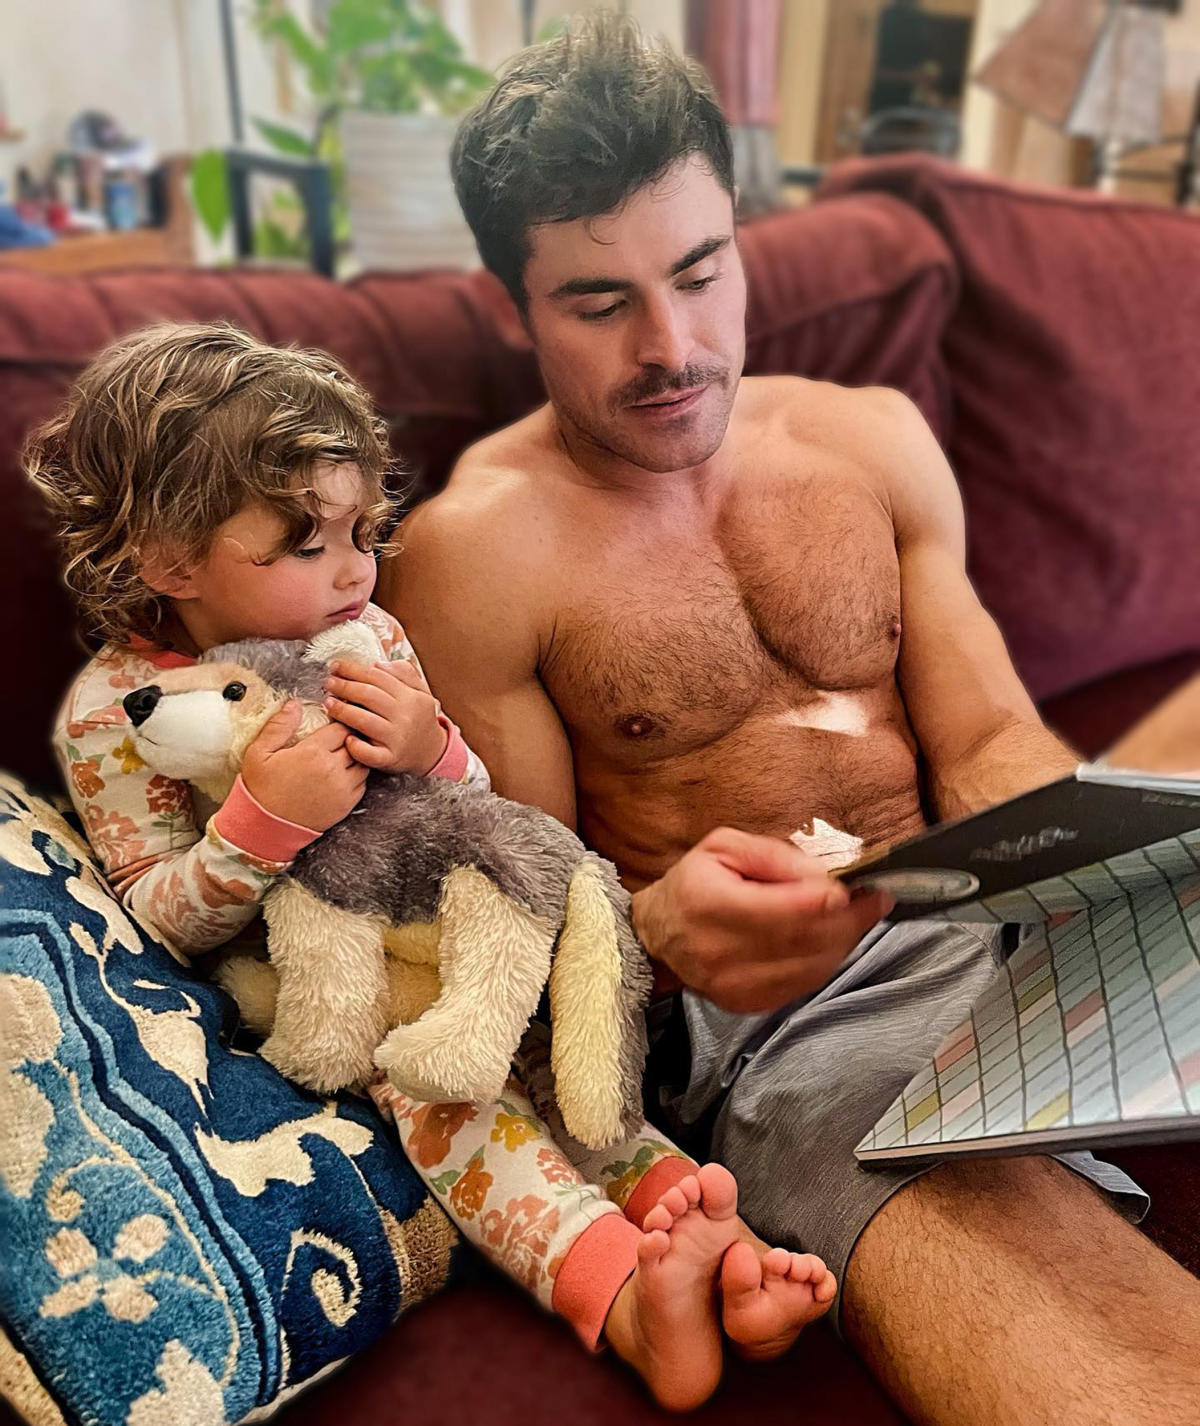  Zac Efron shares photo of him with his 'valentine': His 3-year-old sister 